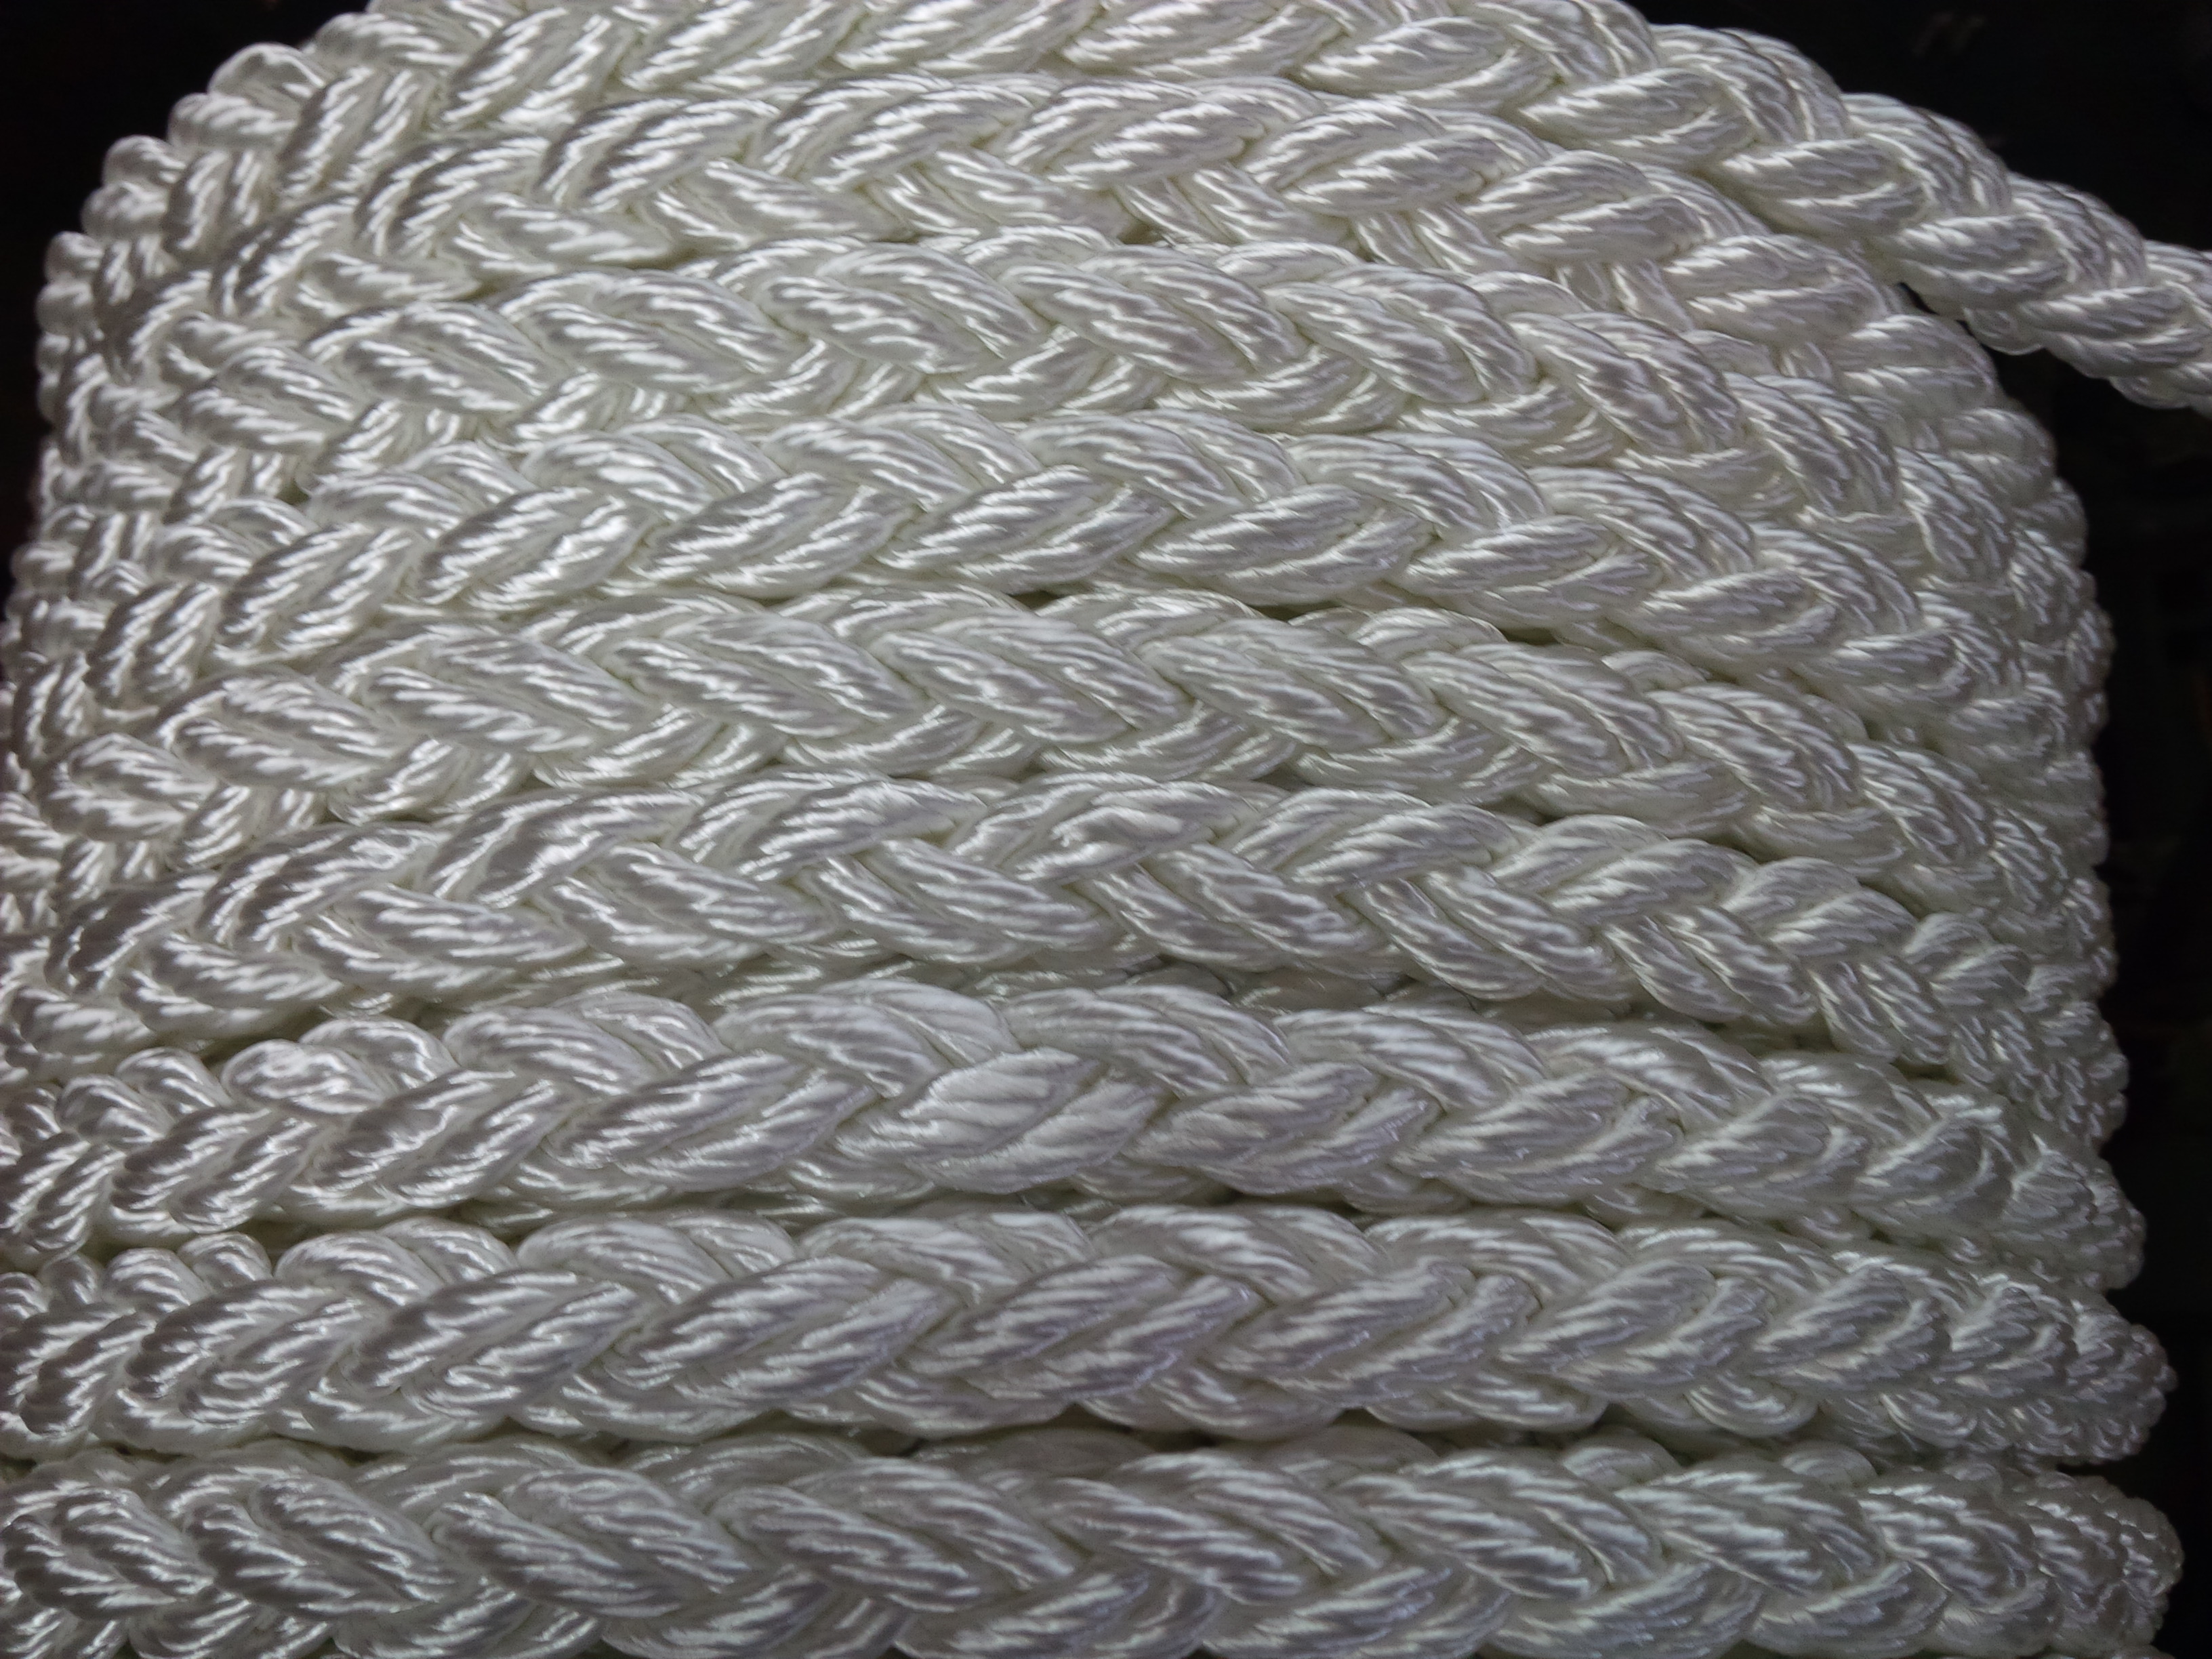 3-Strand Twisted Rope and 8-Strand Plaited Nylon Rope On